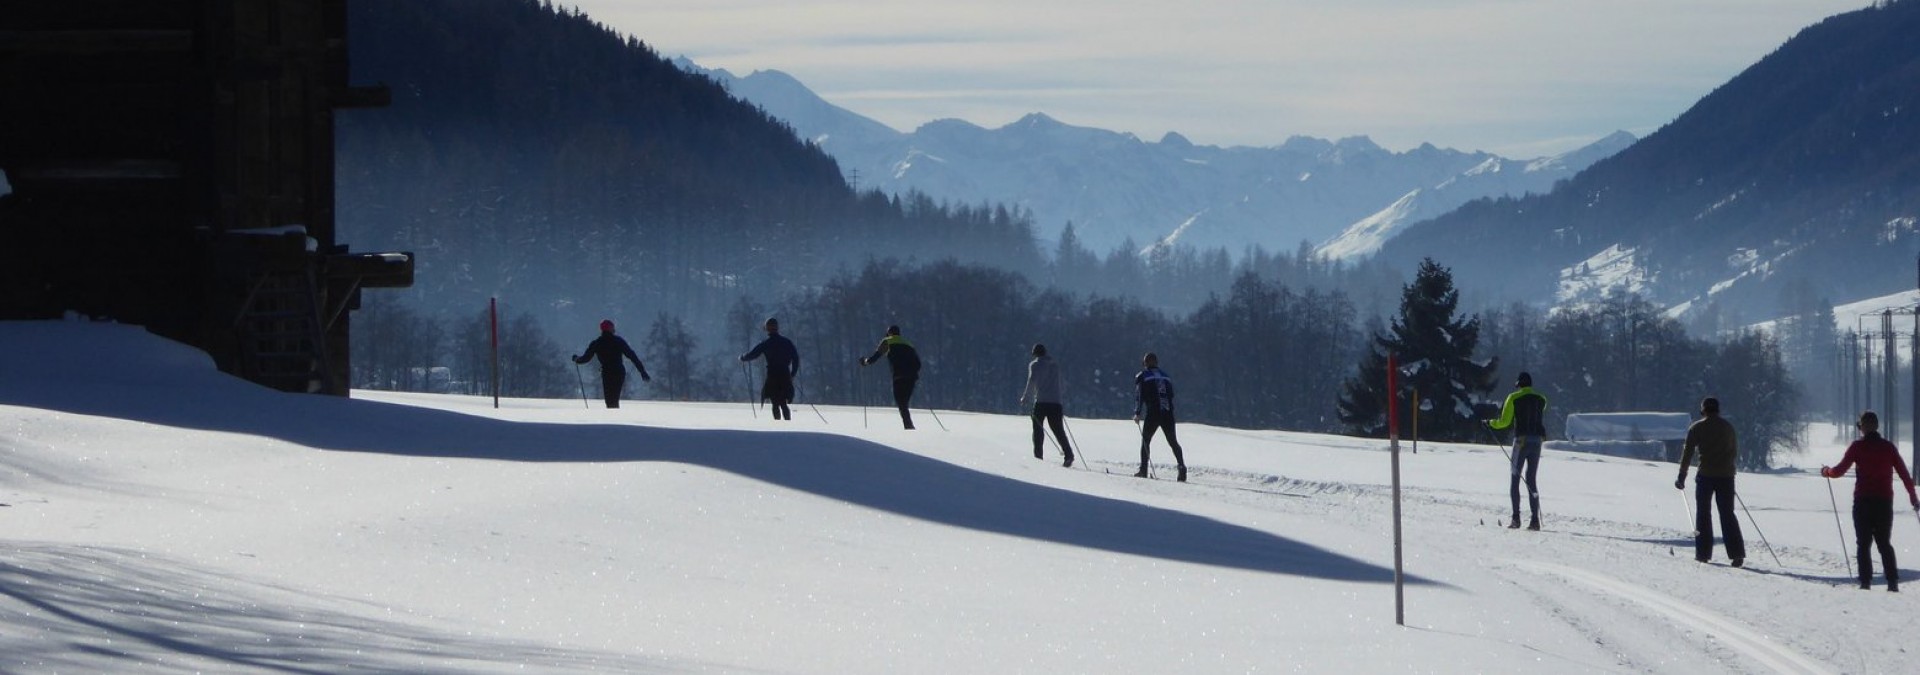 Swiss Alps Cross Country Skiing, Obergoms Valley